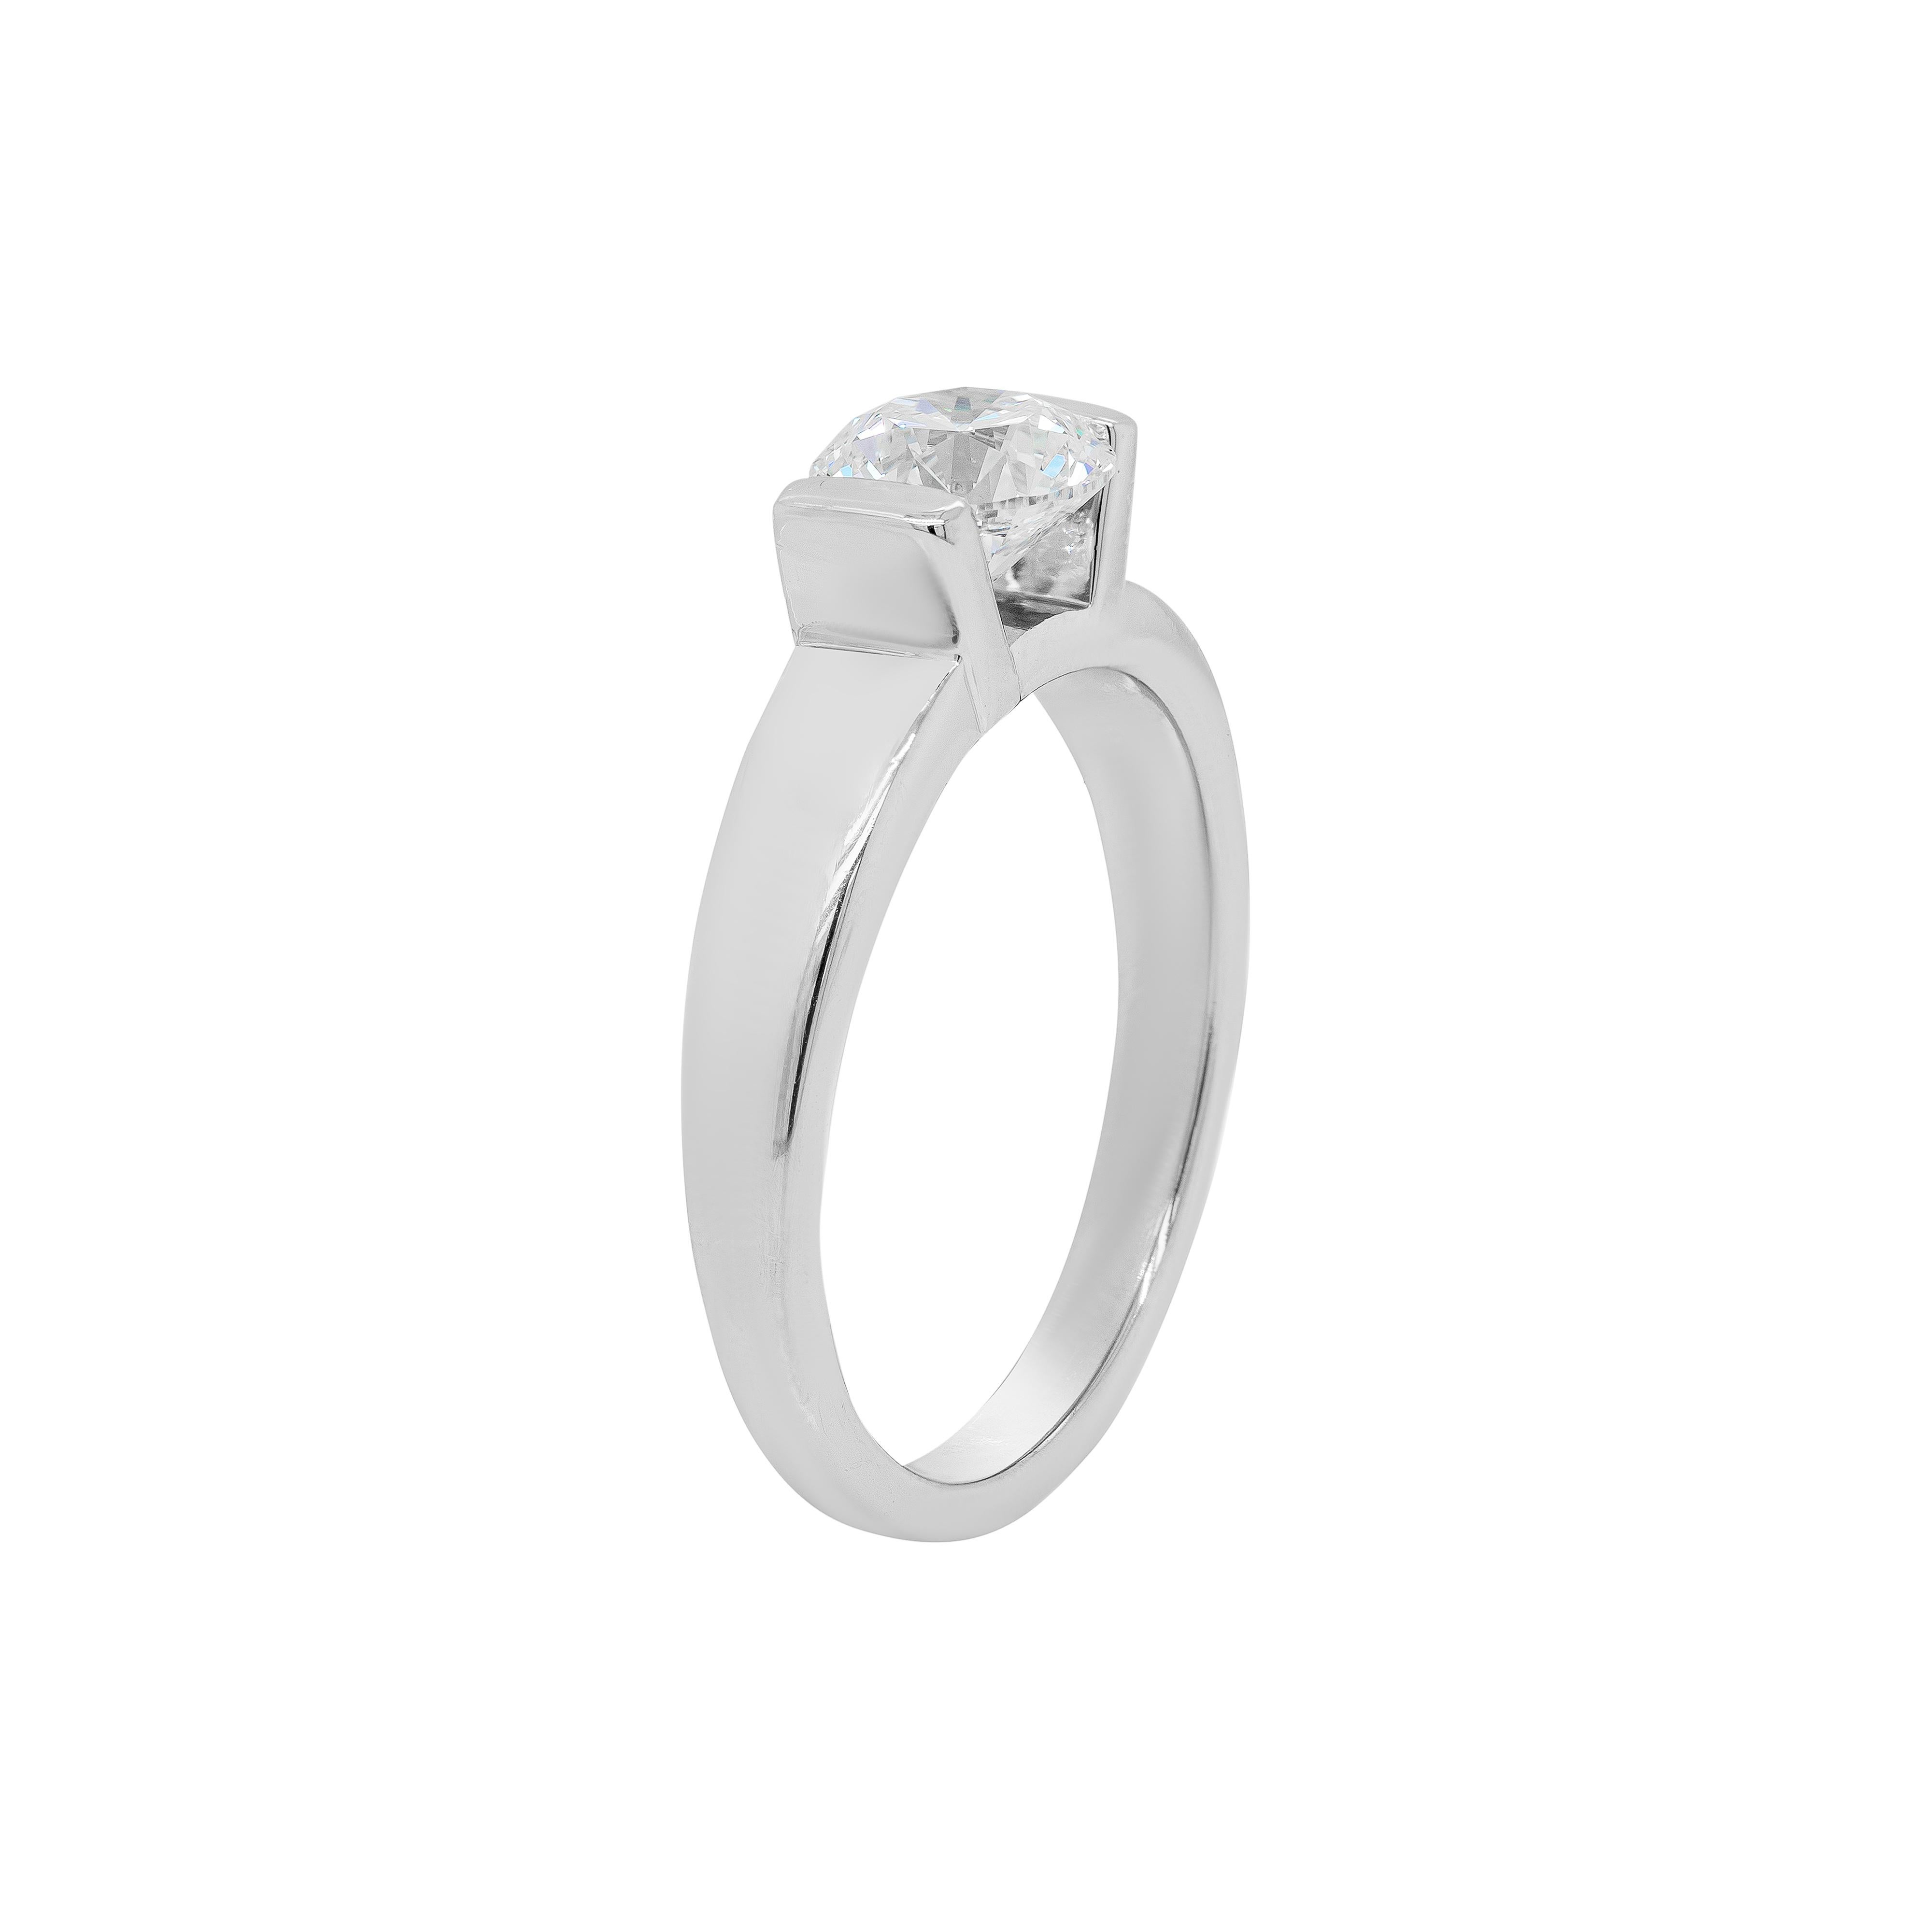 This exquisite engagement ring features a wonderful 1.01ct round brilliant cut diamond, certified E in colour and VS2 in clarity, that is beautifully mounted in a high semi rub-over setting. The beautiful piece is completed by a perfectly crafted